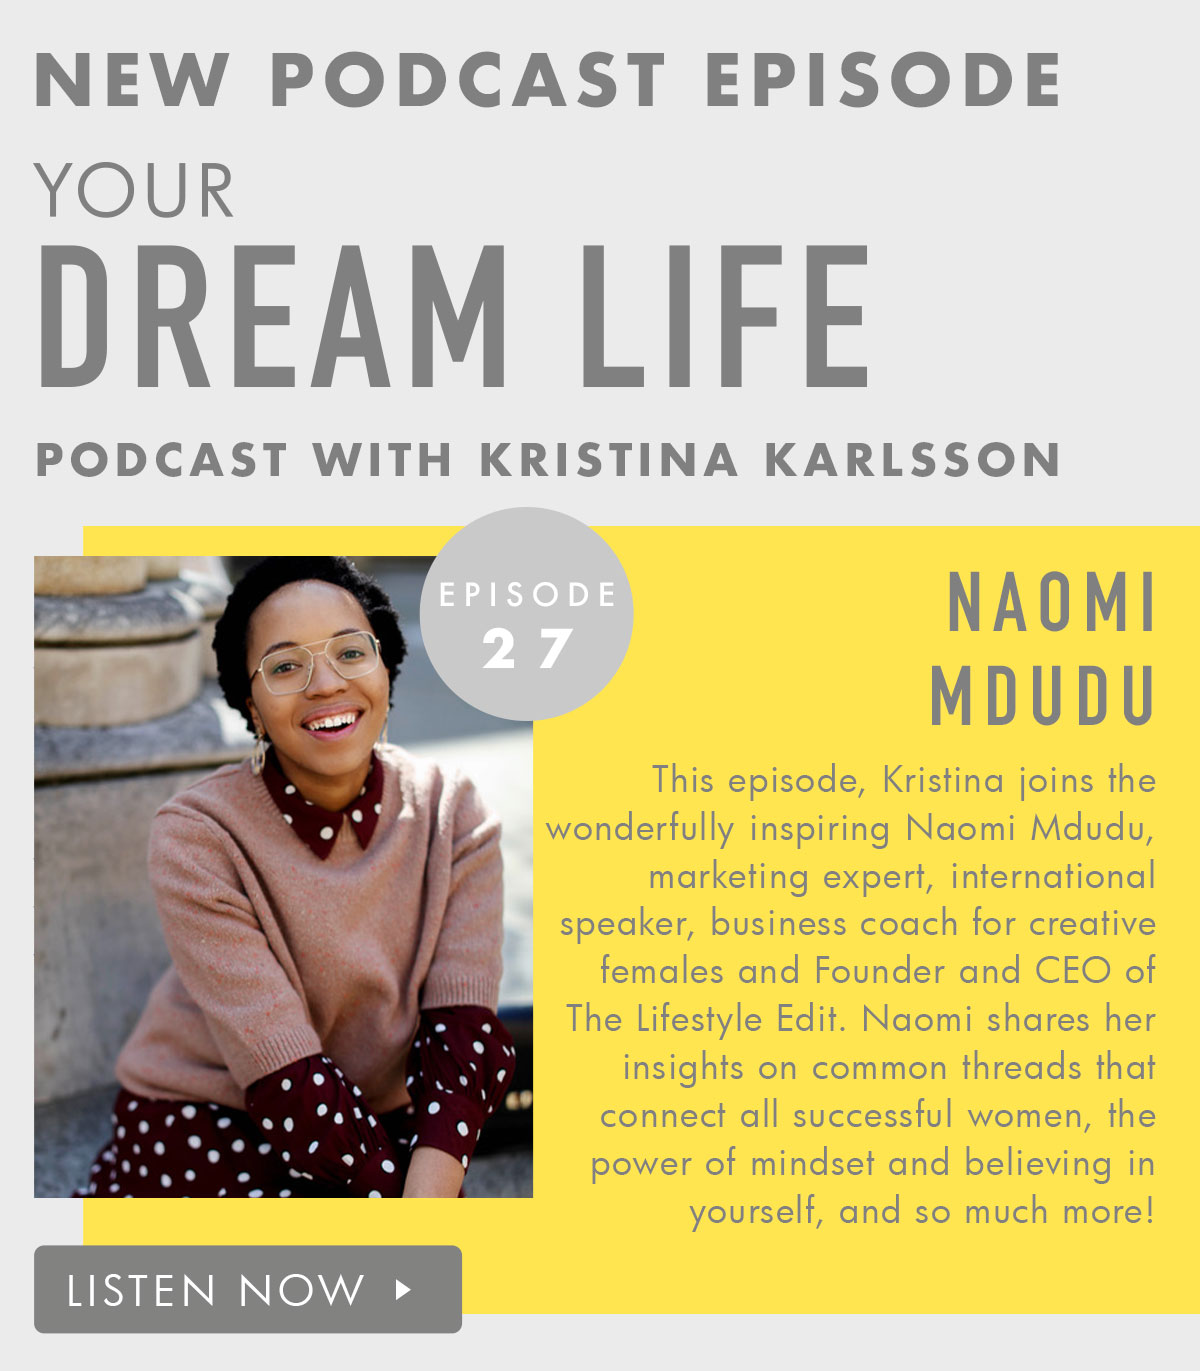 New Podcast Episode. Your Dream Life episode 27. Listen now. 